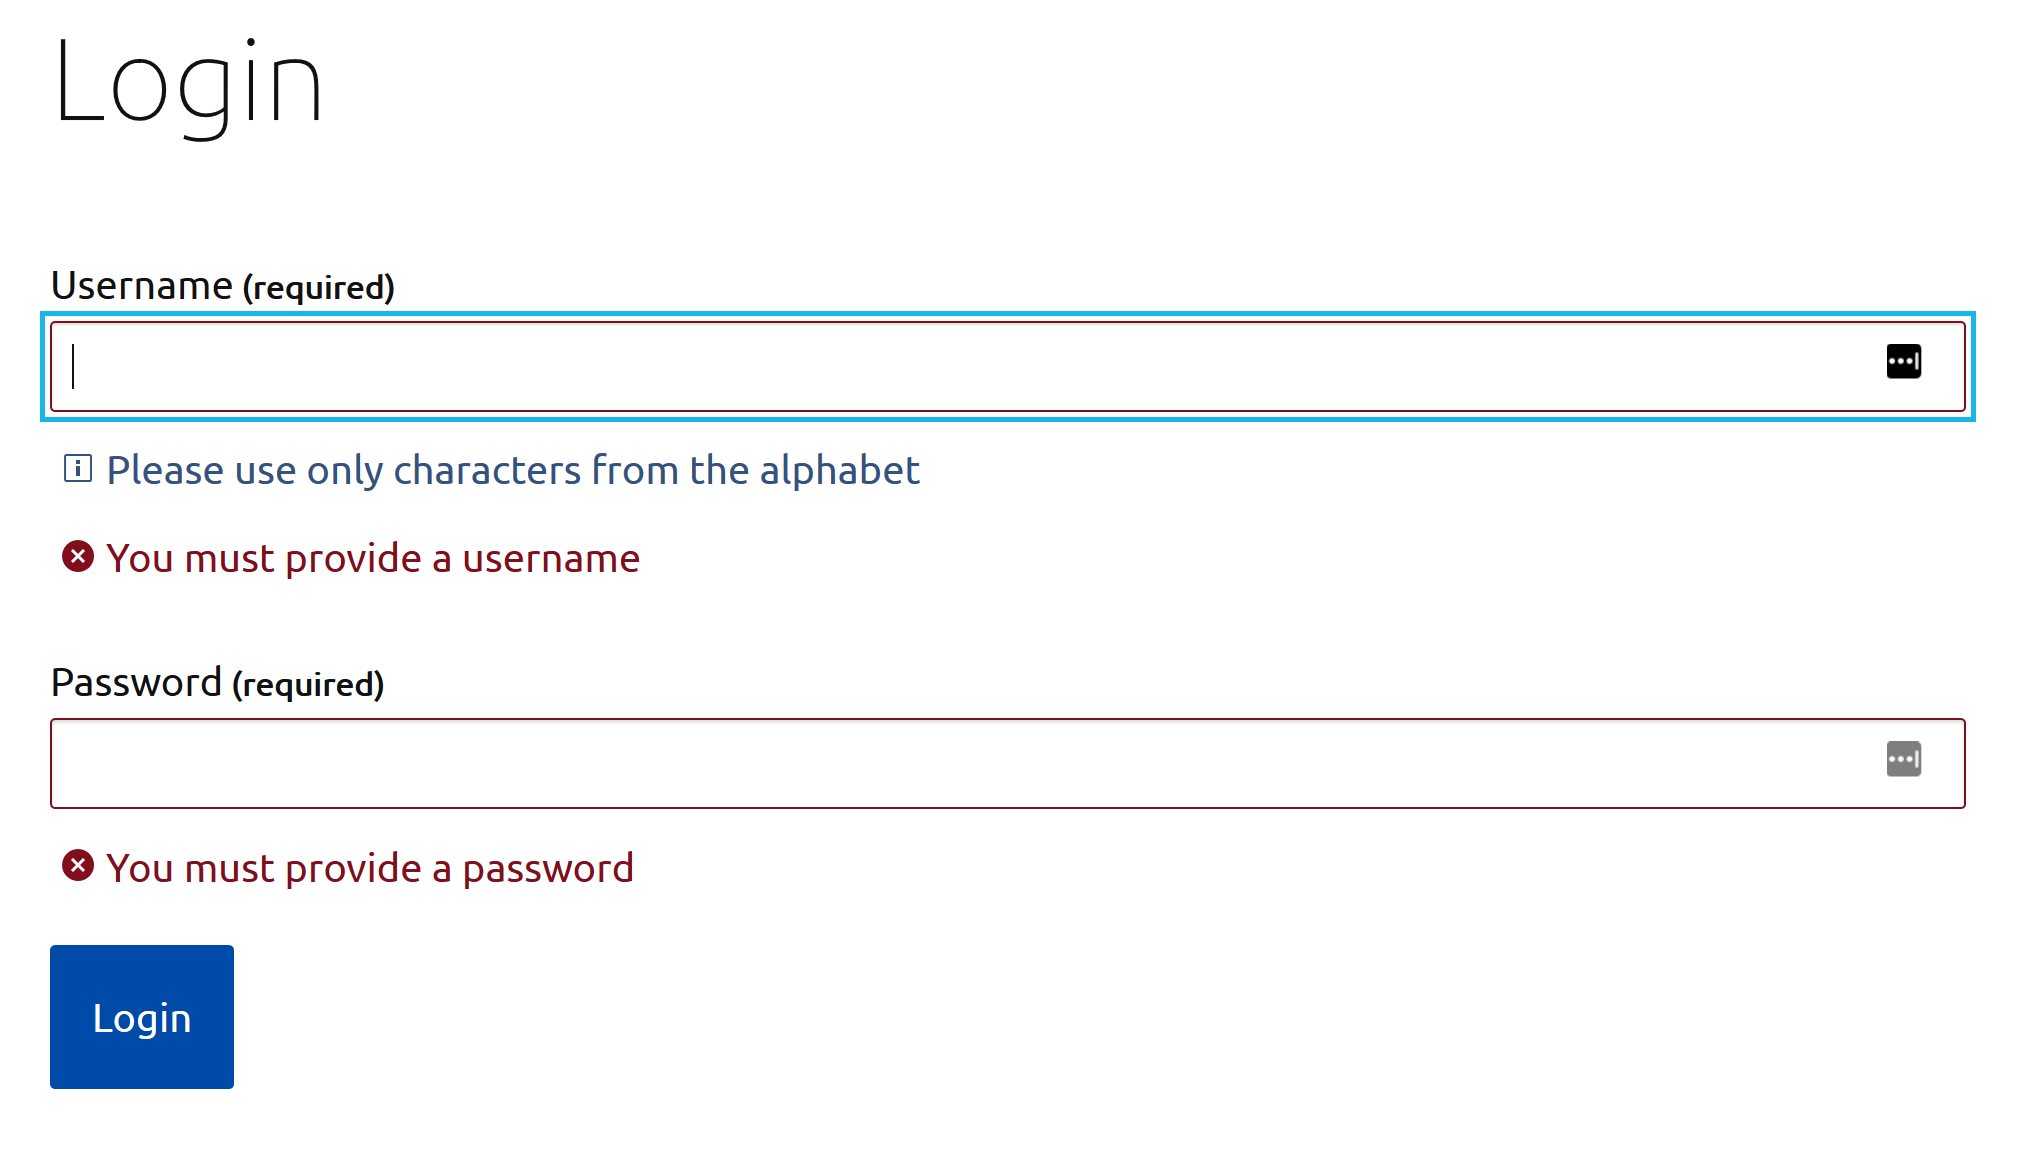 A login form showing required field validation messages